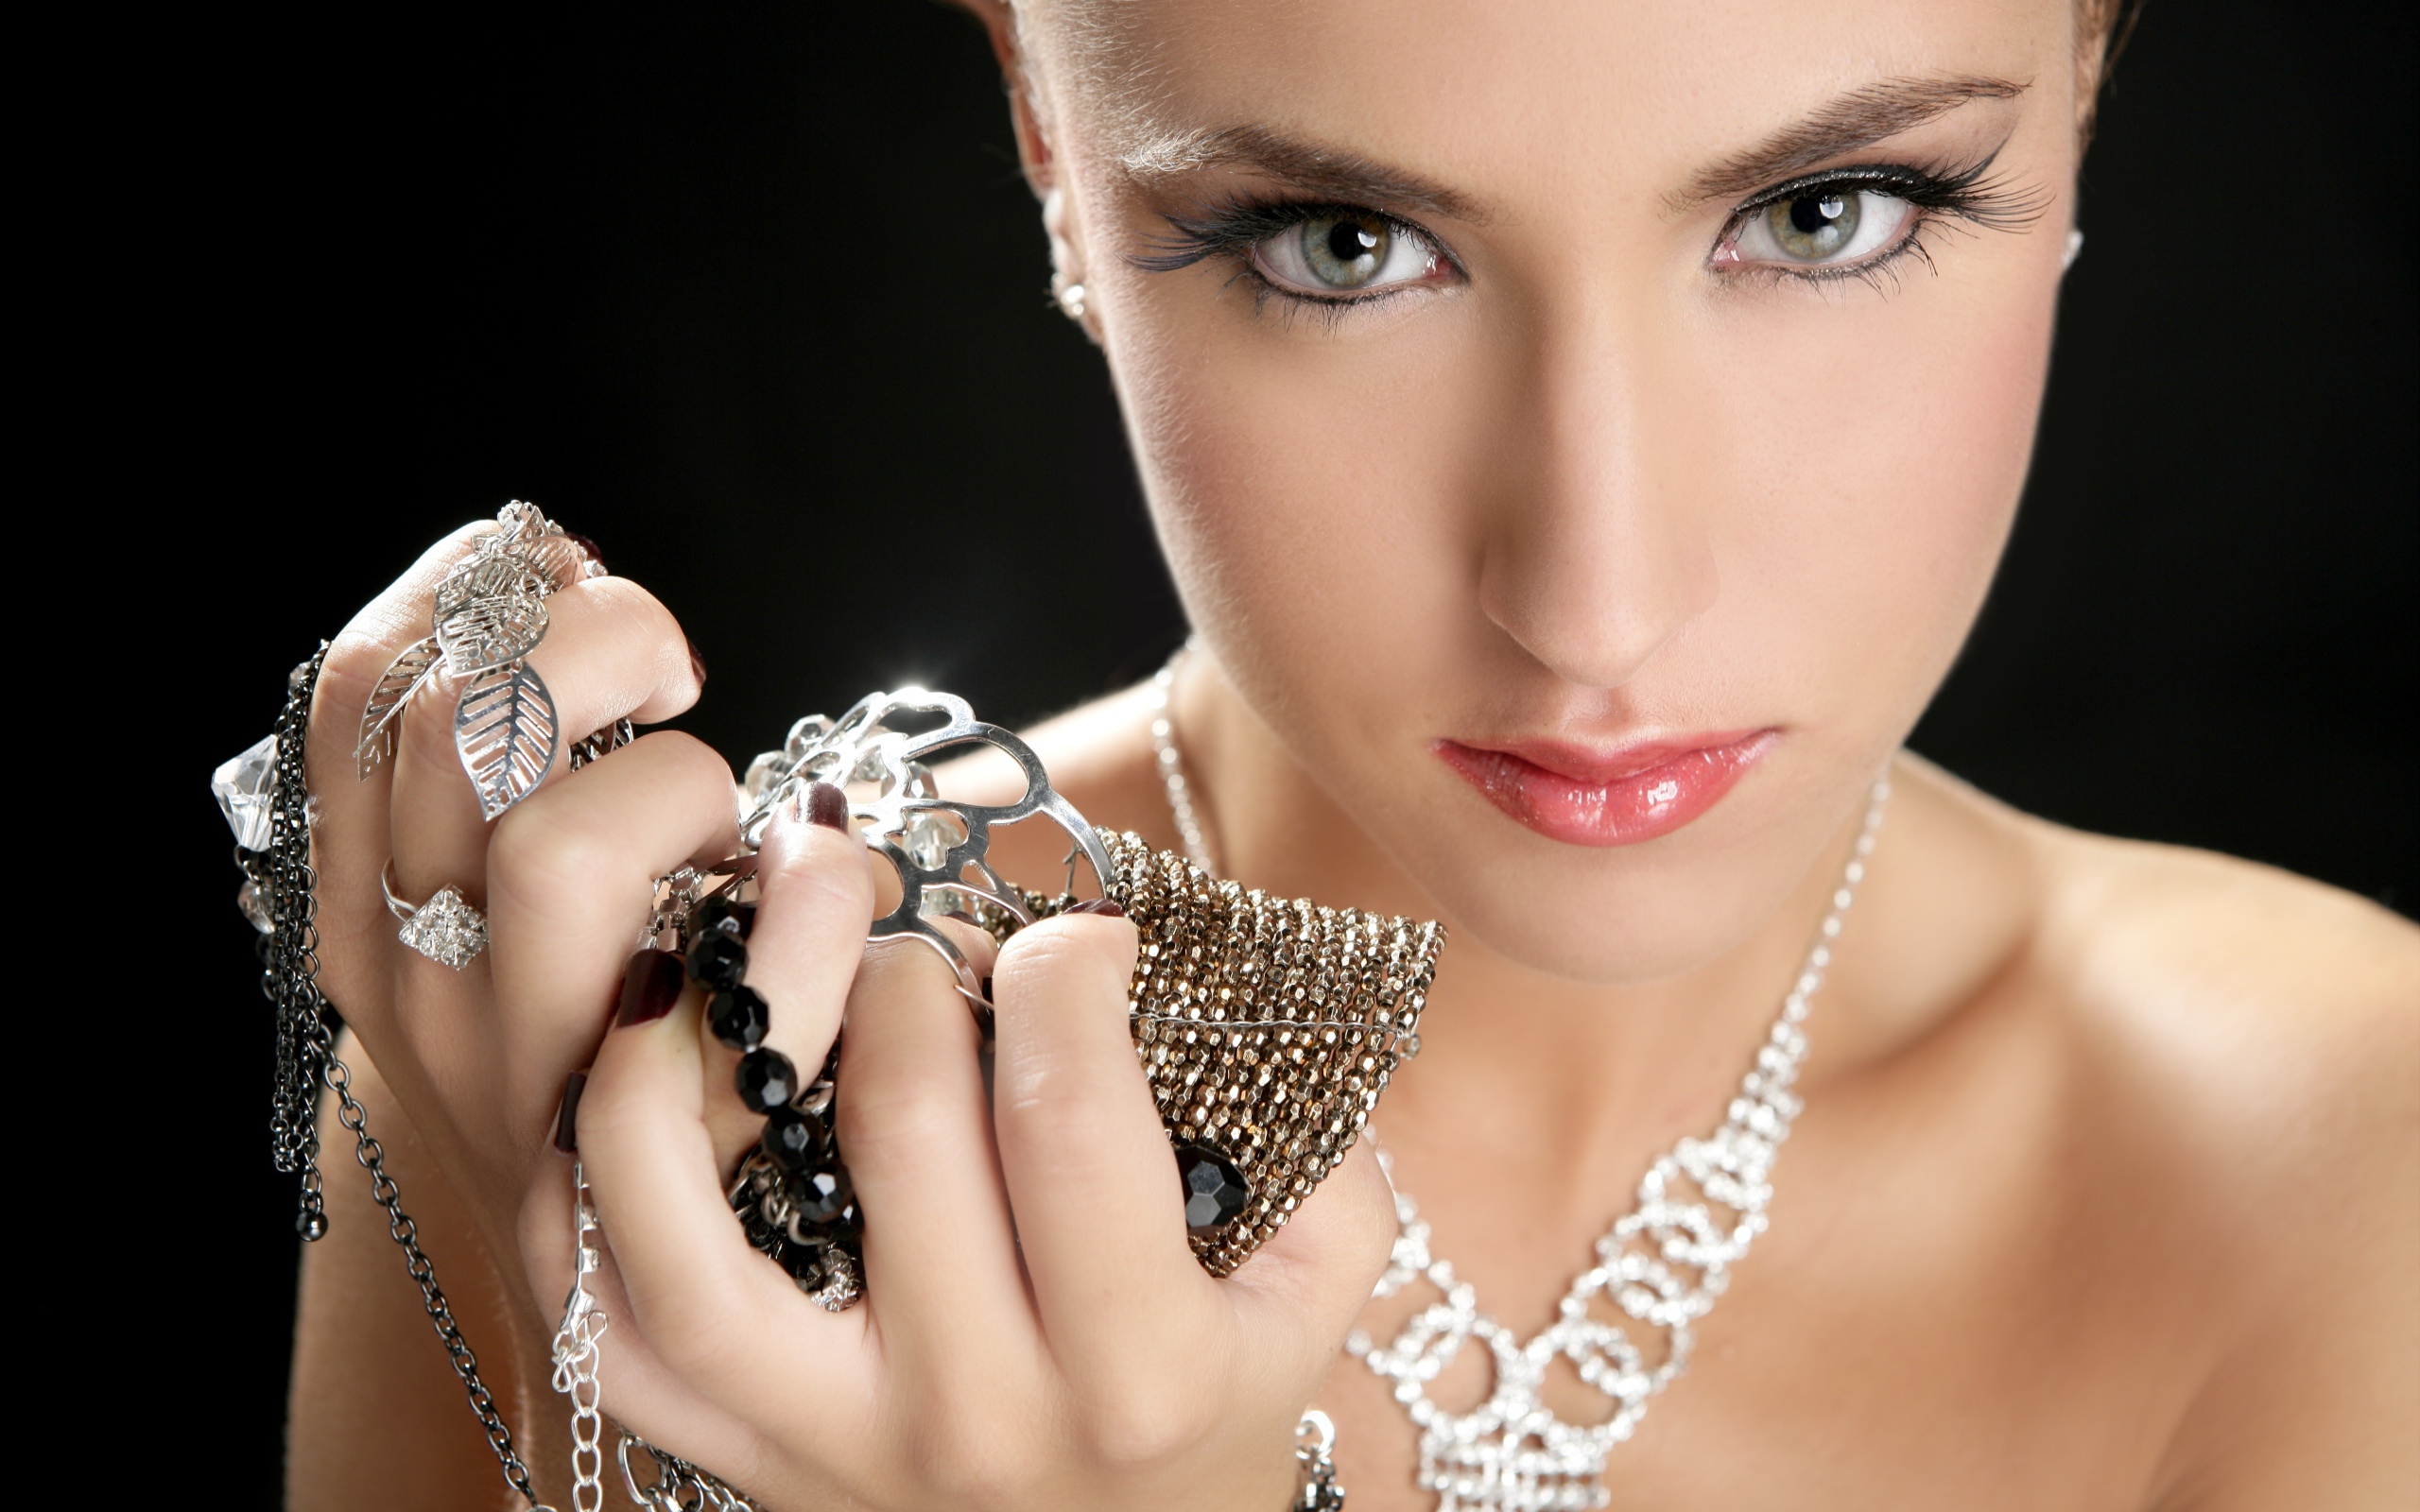 Girl with long eyelashes holds jewelry in her hand.